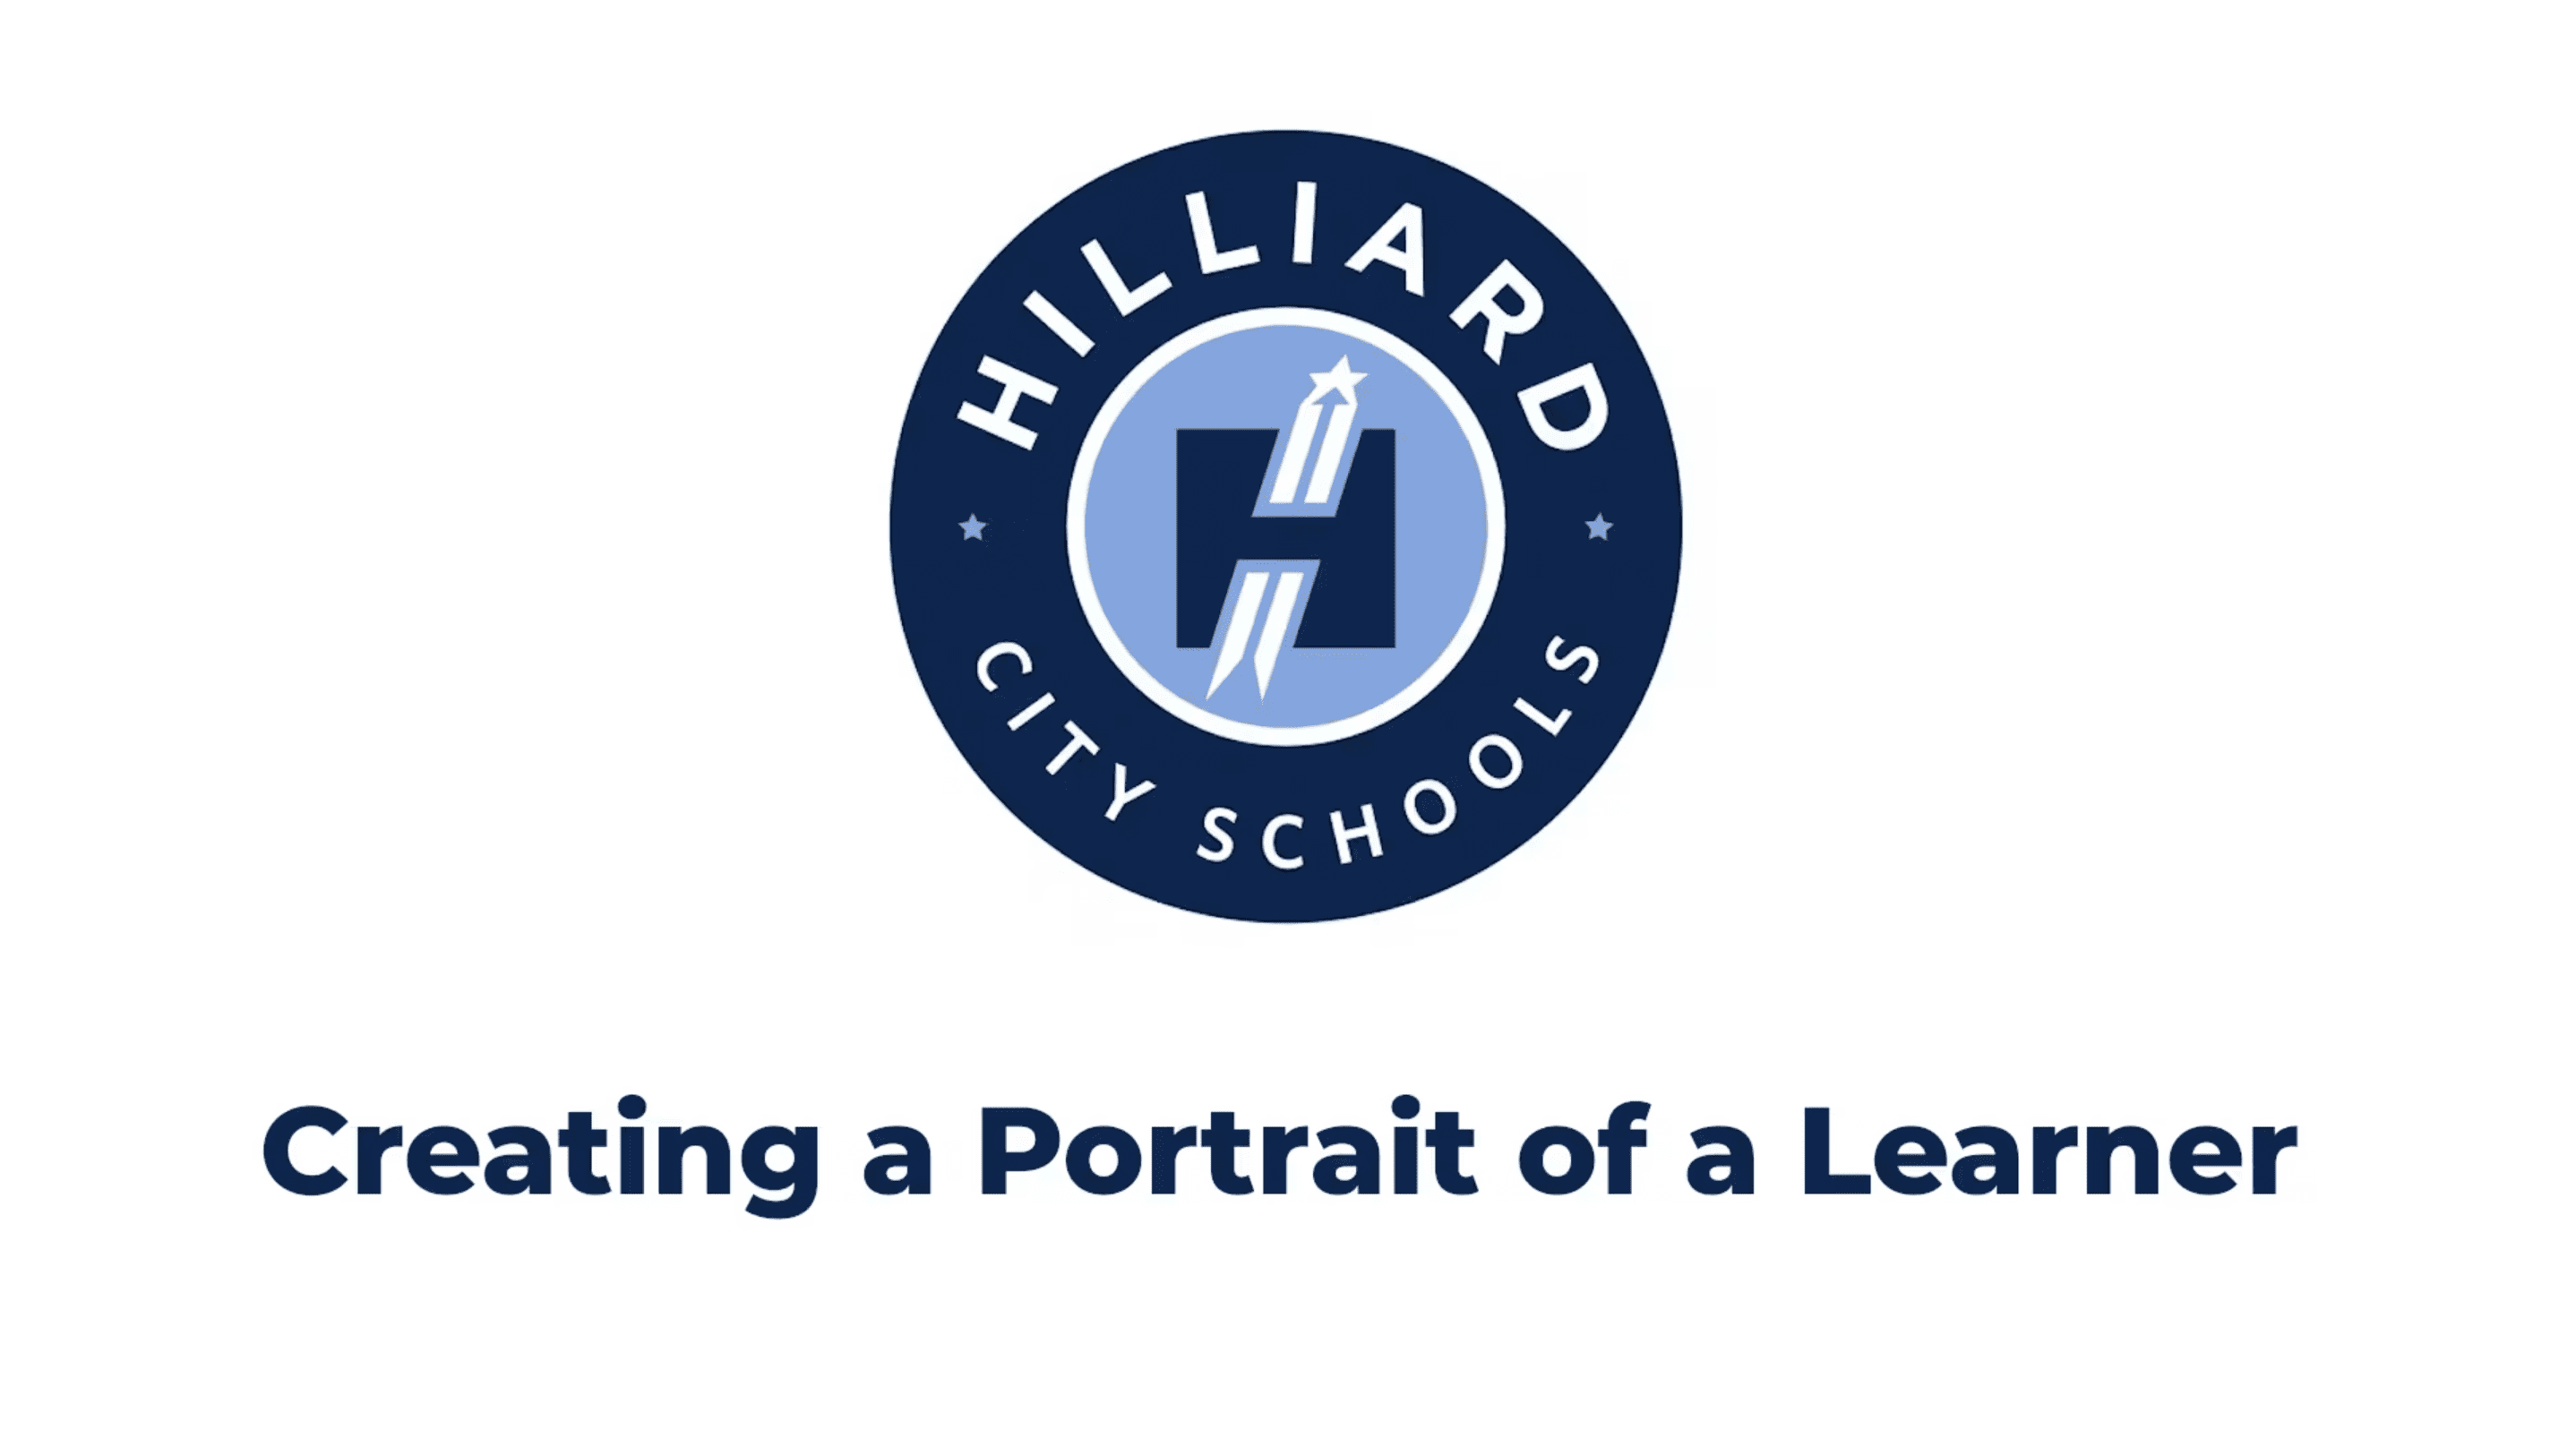 Creating a Portrait of a Learner